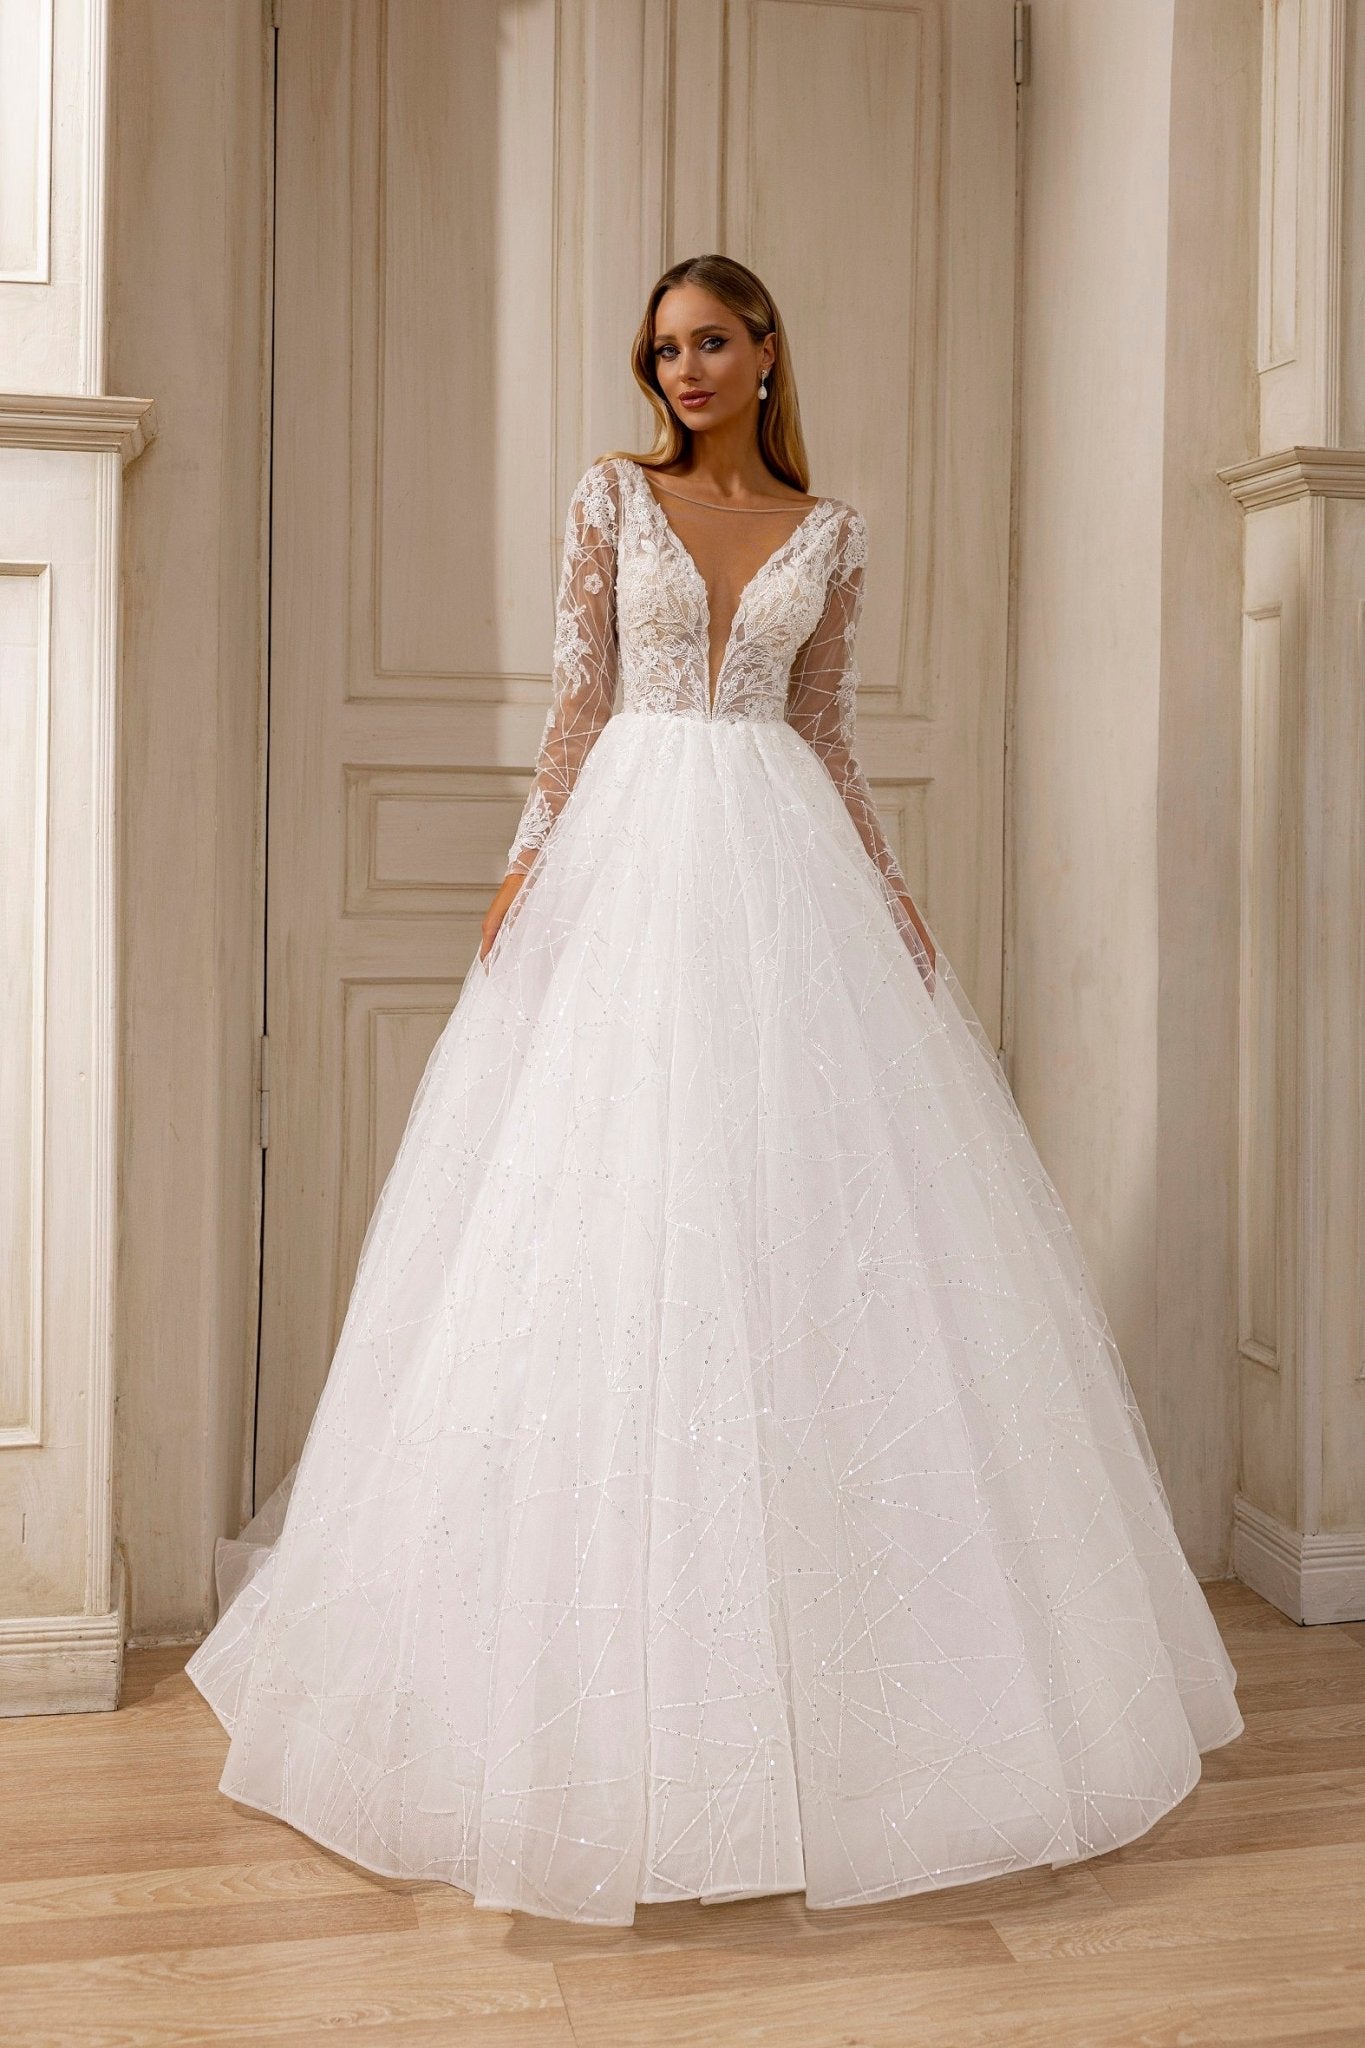 Regal Princess-Inspired A-Line Wedding Gown with Sequined Lace and Sheer Sleeves - WonderlandByLilian